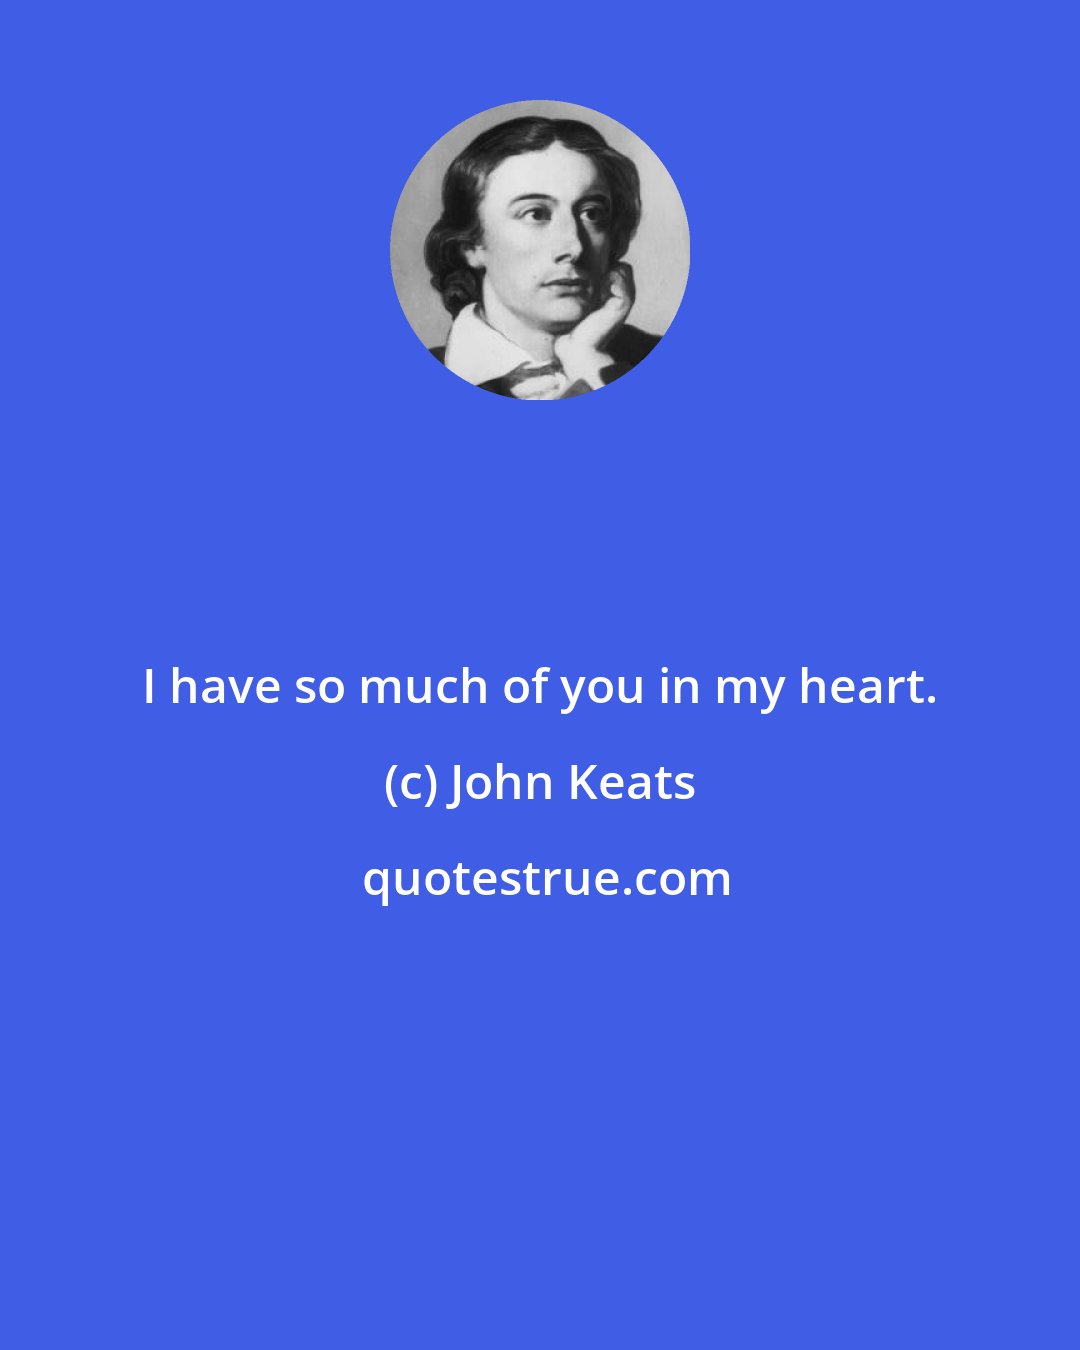 John Keats: I have so much of you in my heart.